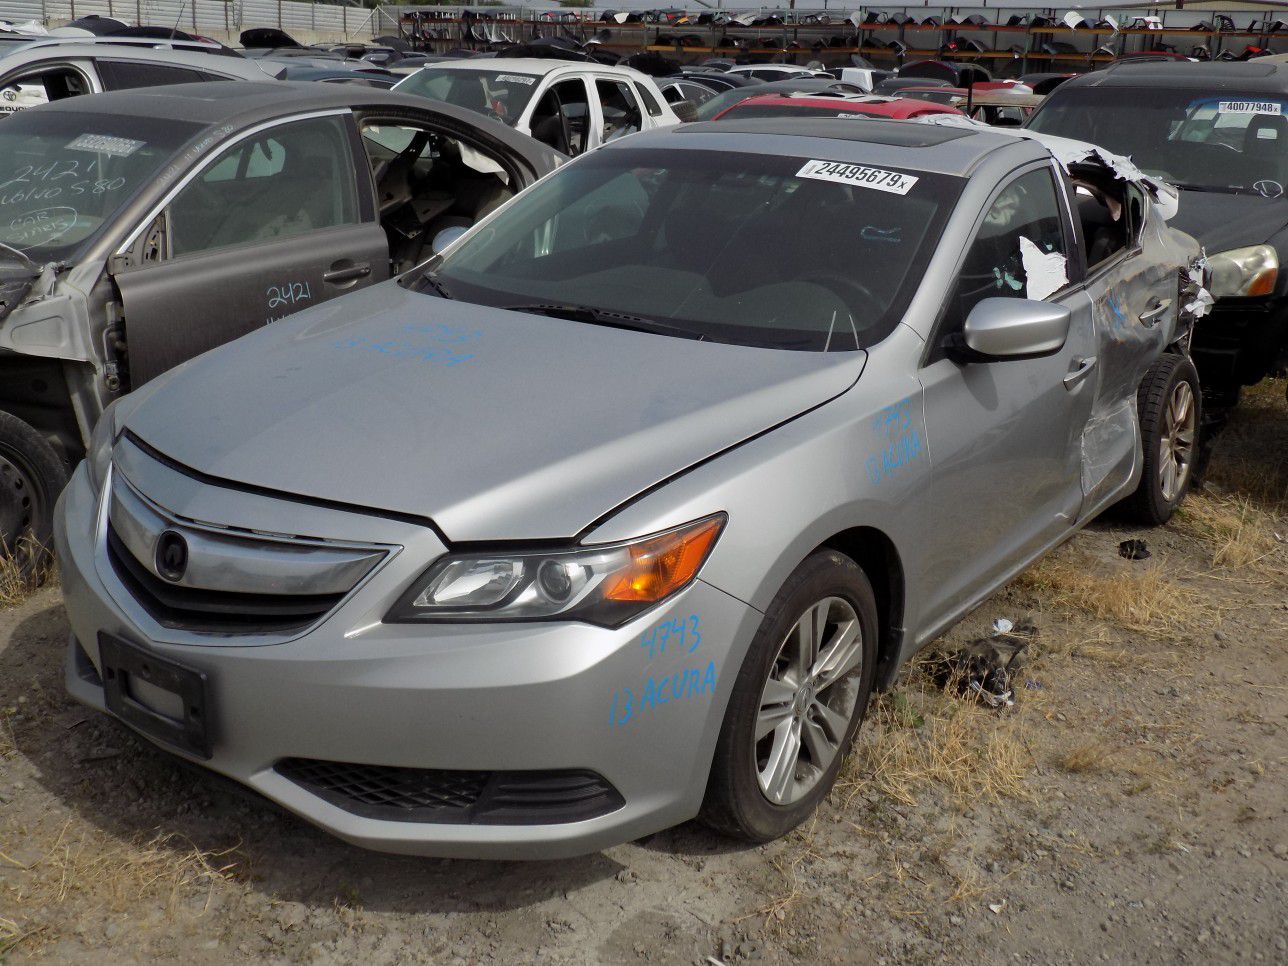 2013 Acura ILX 2.0L (PARTING OUT)